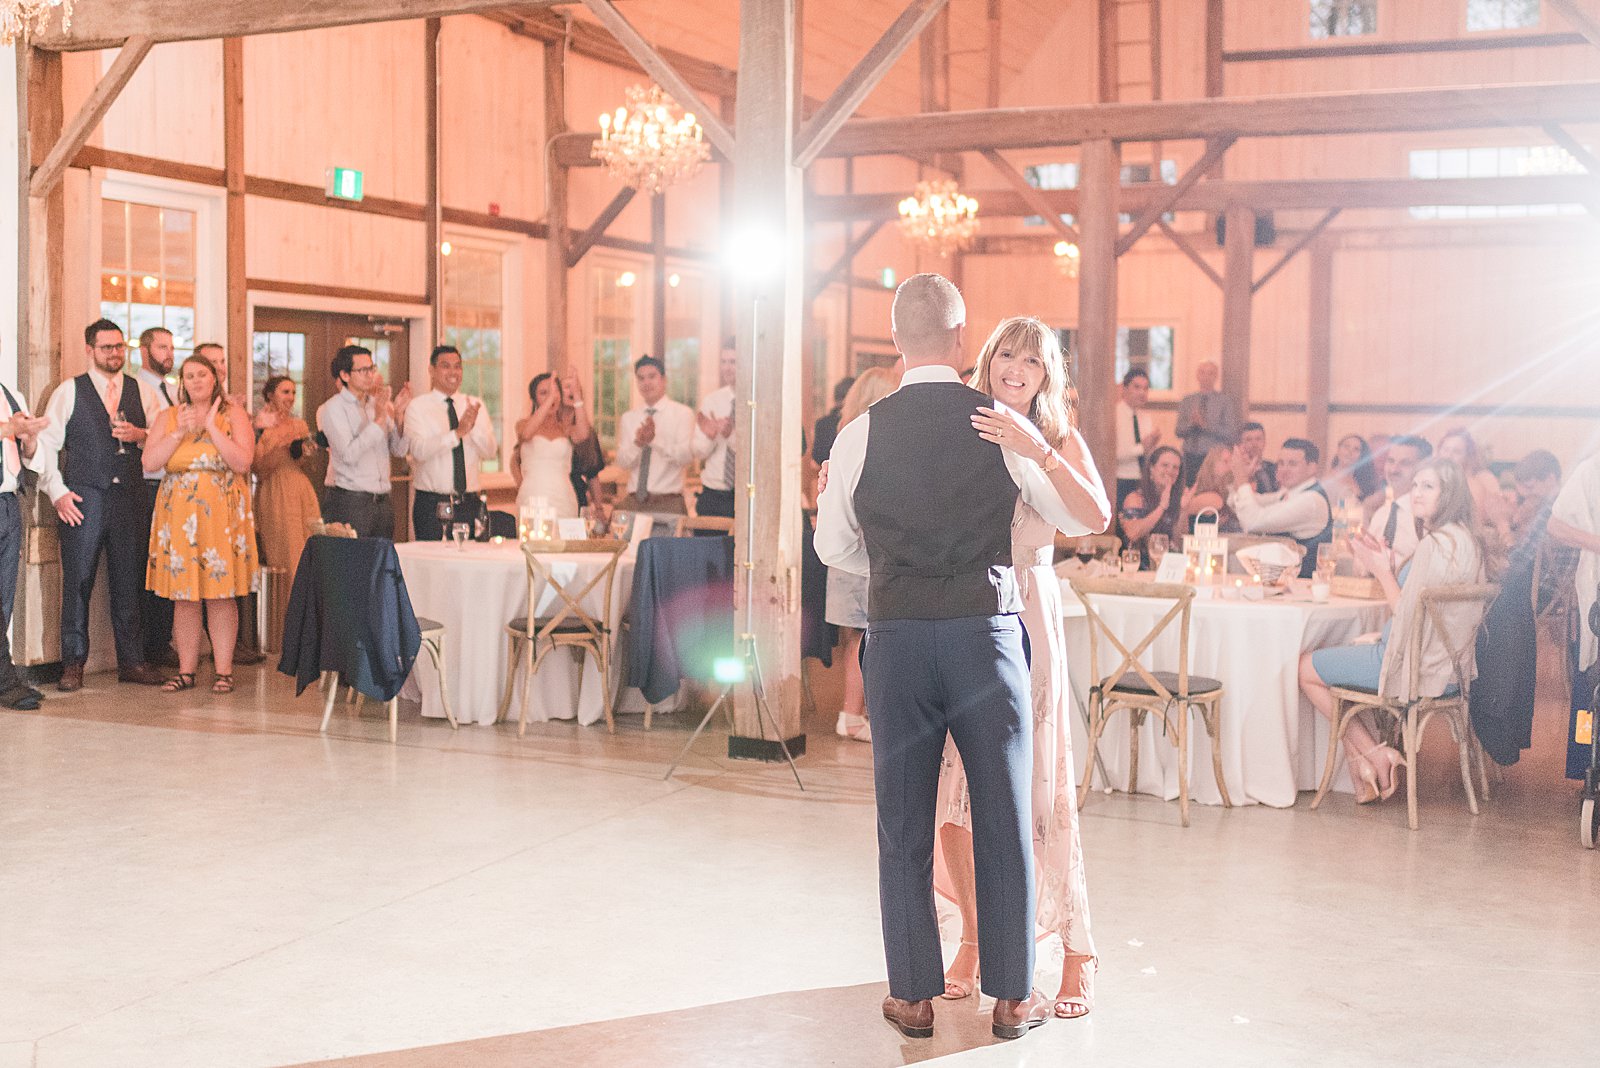 Summer Stonefields Estate Wedding | Ottawa Wedding | Wedding photos at the Barn Loft at Stonefields Estate in Beckwith Get more inspiration from this fun summertime wedding. #ottawawedding #weddingphotography #ottawaweddings